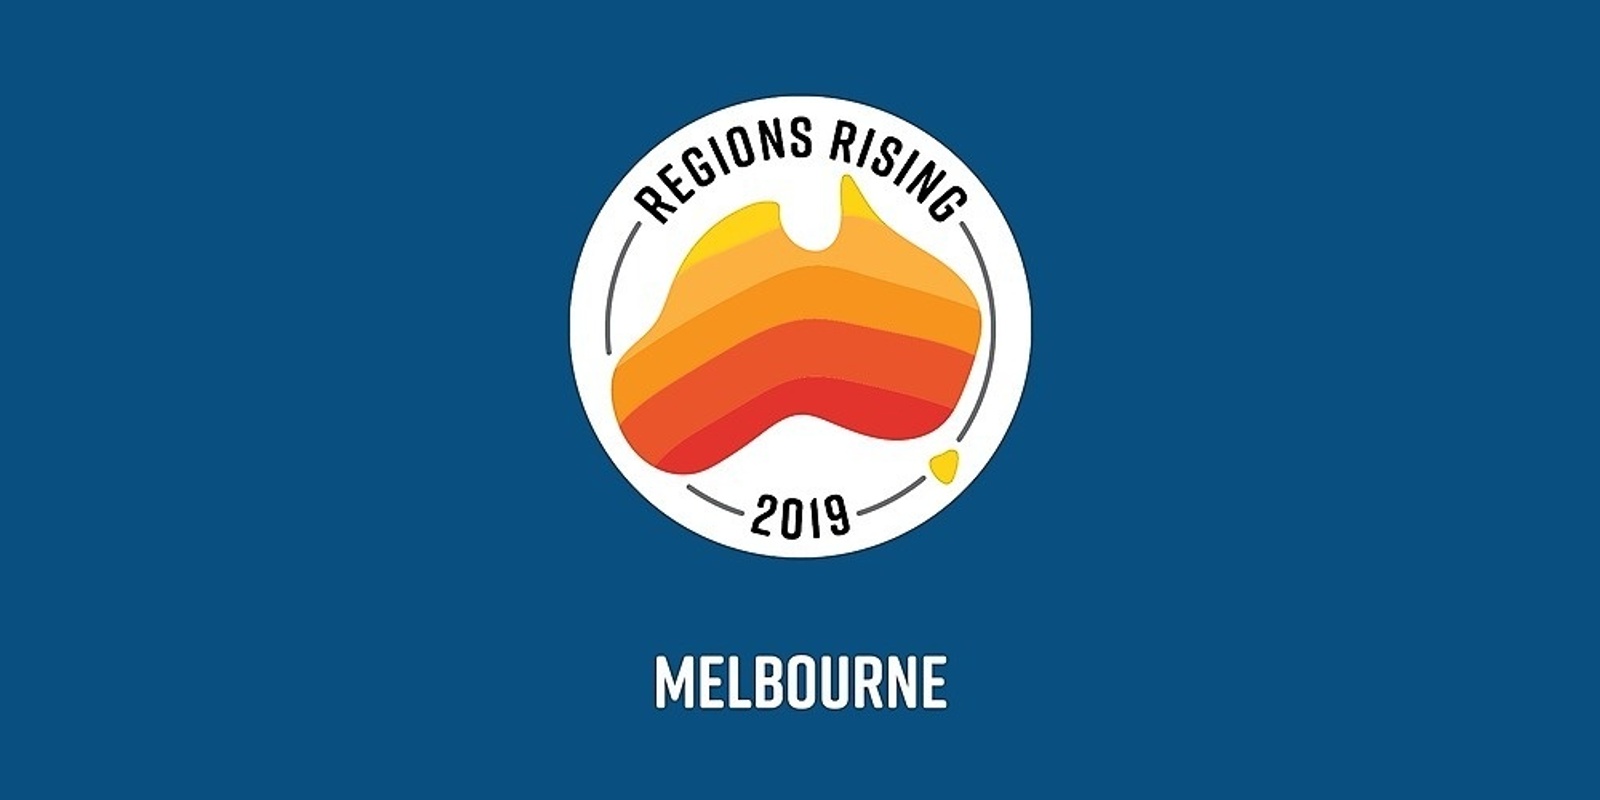 Banner image for Regions Rising VIC